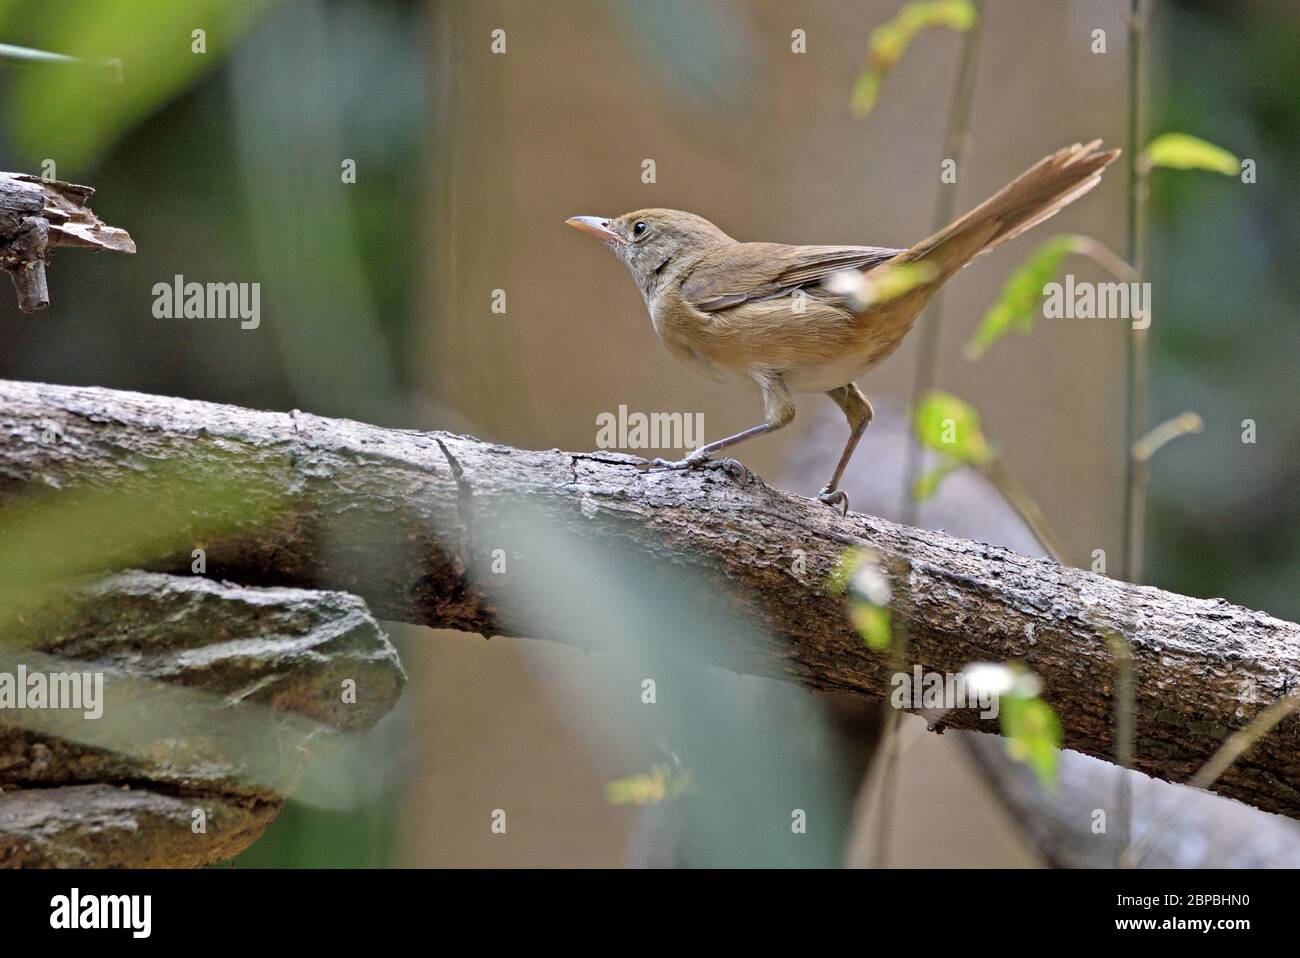 A Thick-billed Warbler (Arundinax aedon) perched on a small branch in the forest in Western Thailand Stock Photo